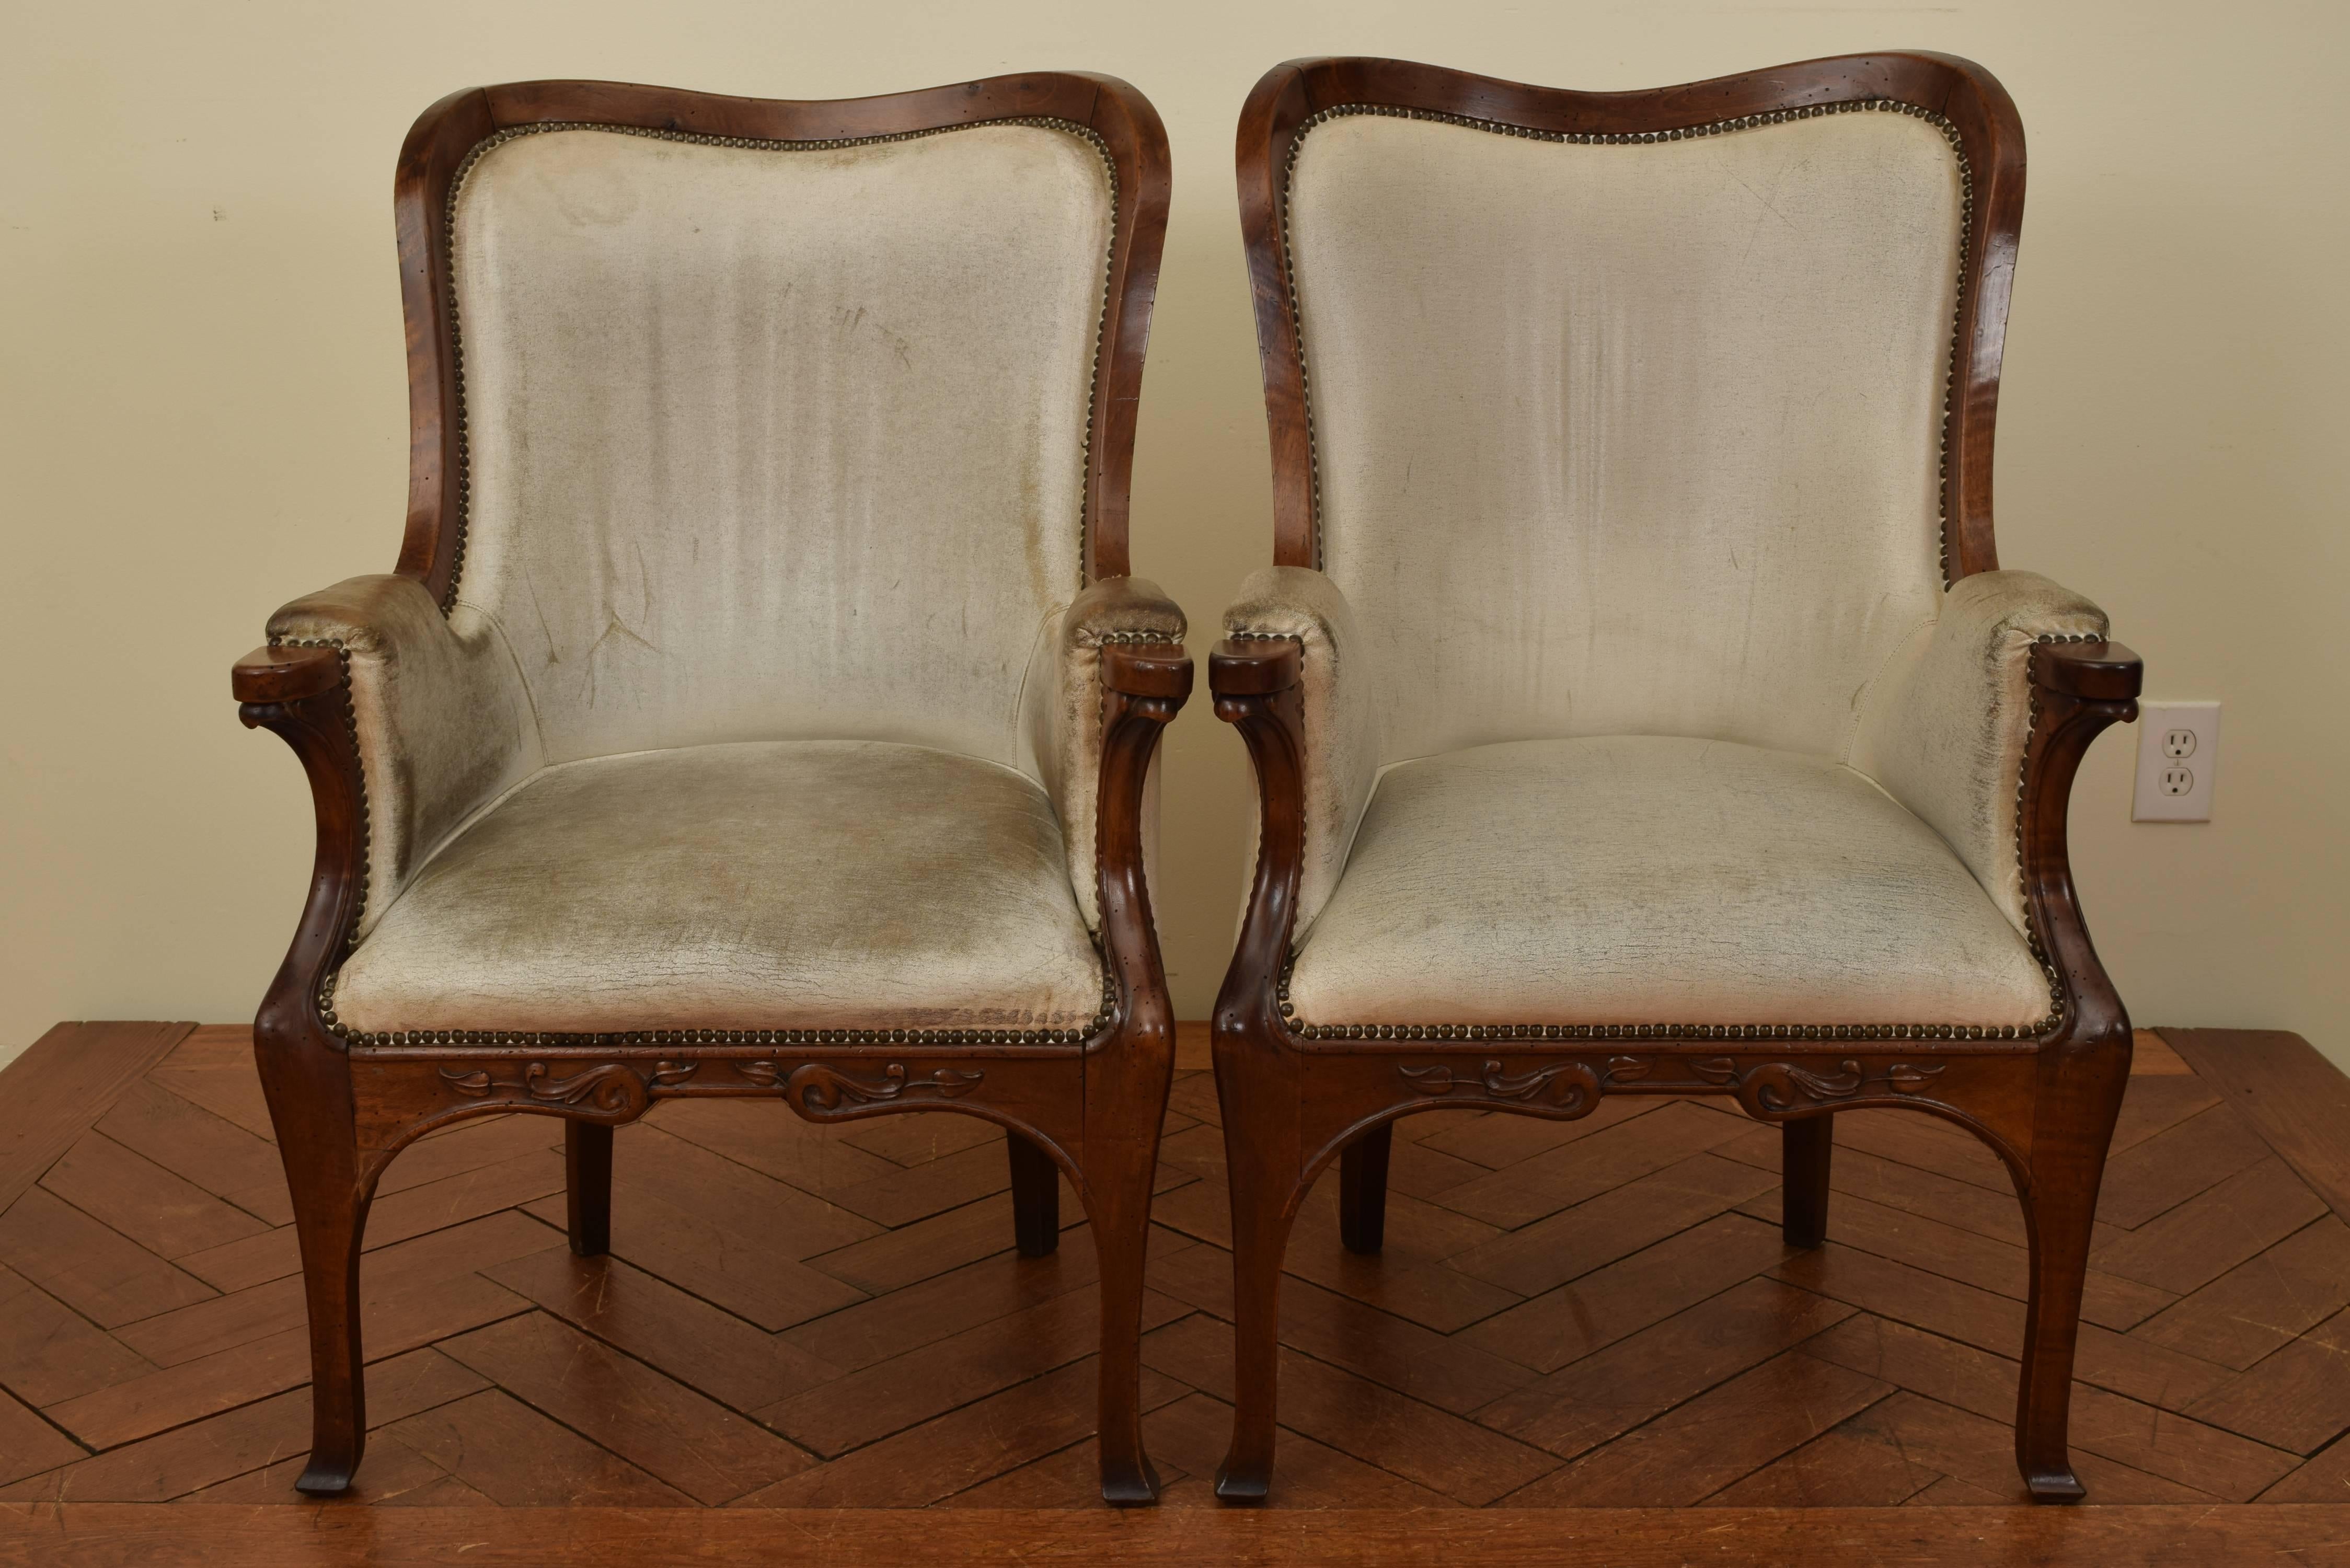 Pair of French walnut Art Nouveau bergères constructed entirely of walnut and upholstered in white leather, the concave backrests continuing to padded arms and carved handles, the front stretchers with scroll and leaf carvings, raised on slightly